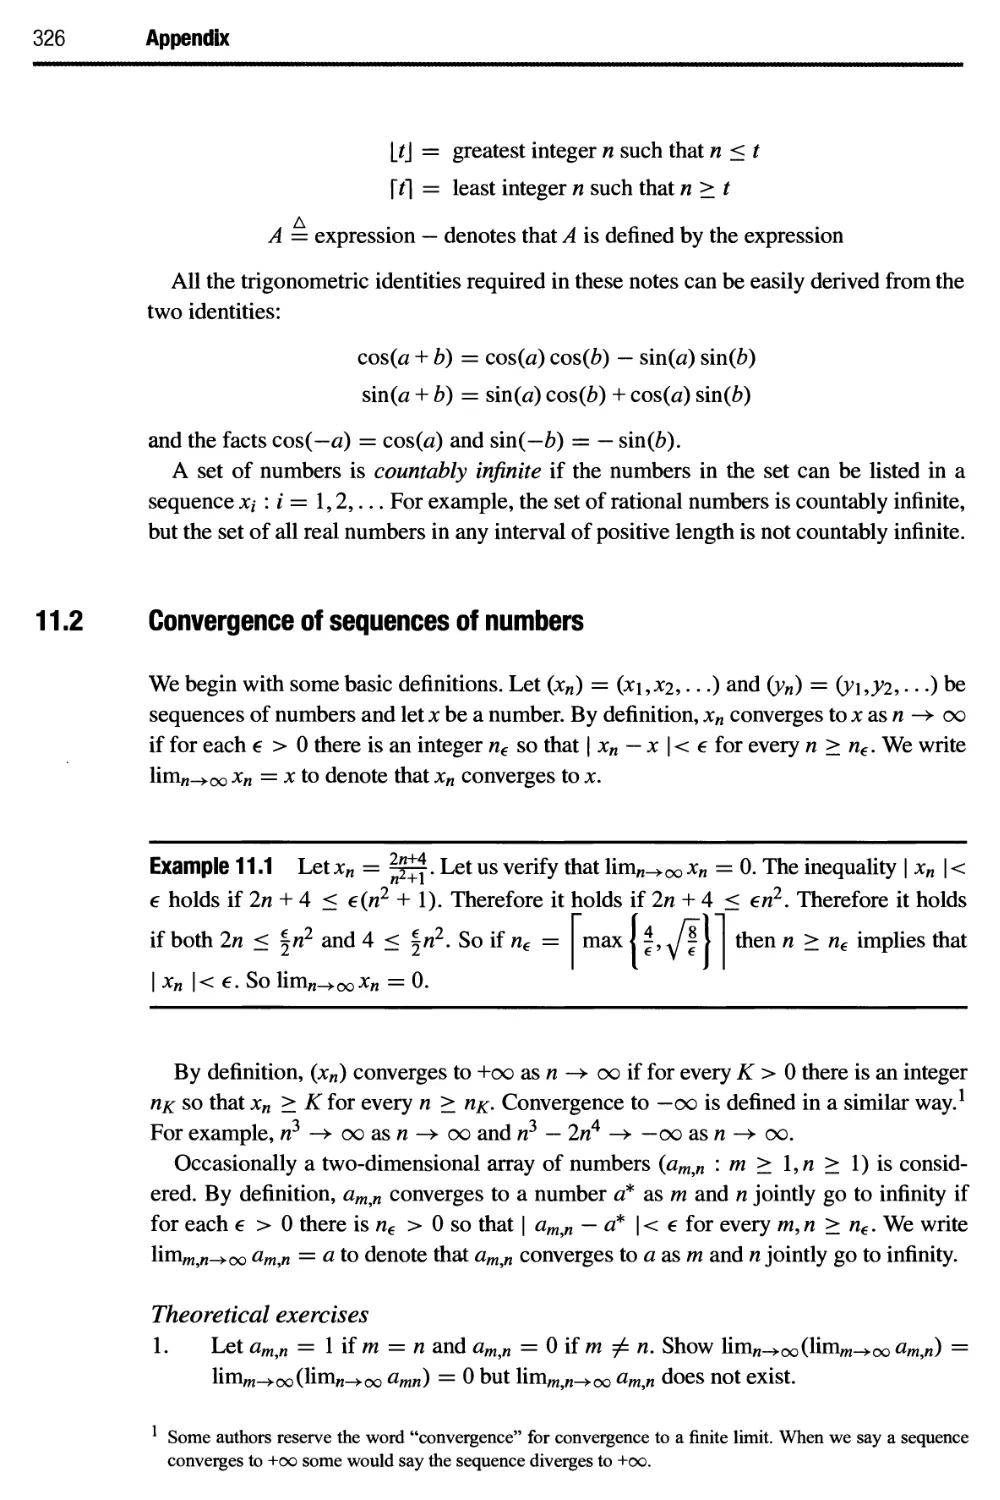 11.2 Convergence of sequences of numbers 326